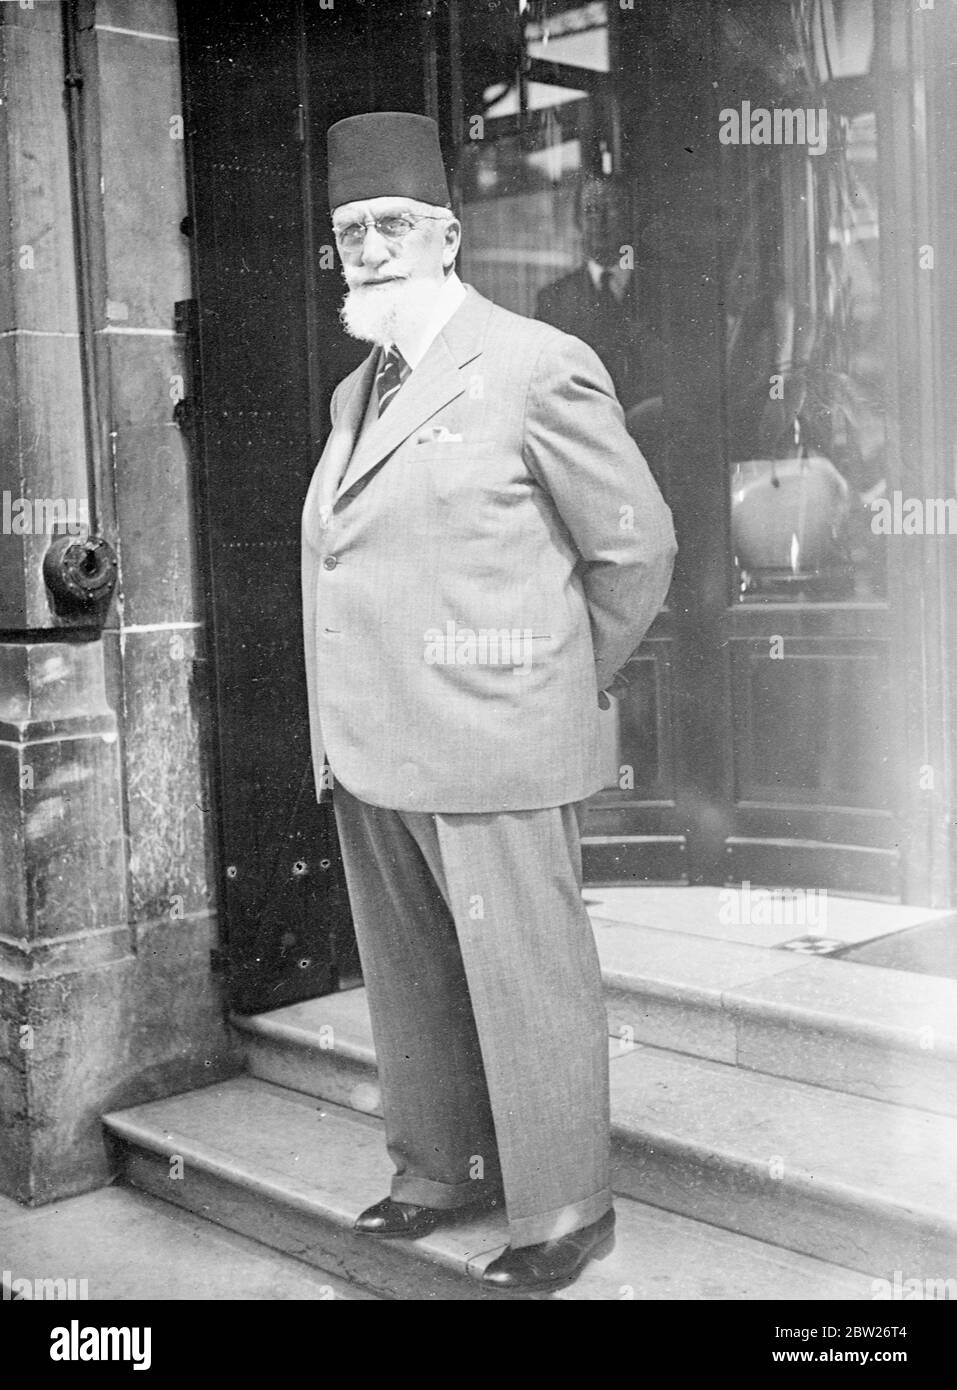 Ex Sultan of Turkey in Paris. The ex Sultan Abdul Medjud II of Turkey is at present on a visit to Paris. The ex Sultan is a noted amateur painter. Photo shows, ex Sultan Abdul Medjud leaving his hotel in Paris. 11 July 1938 Stock Photo